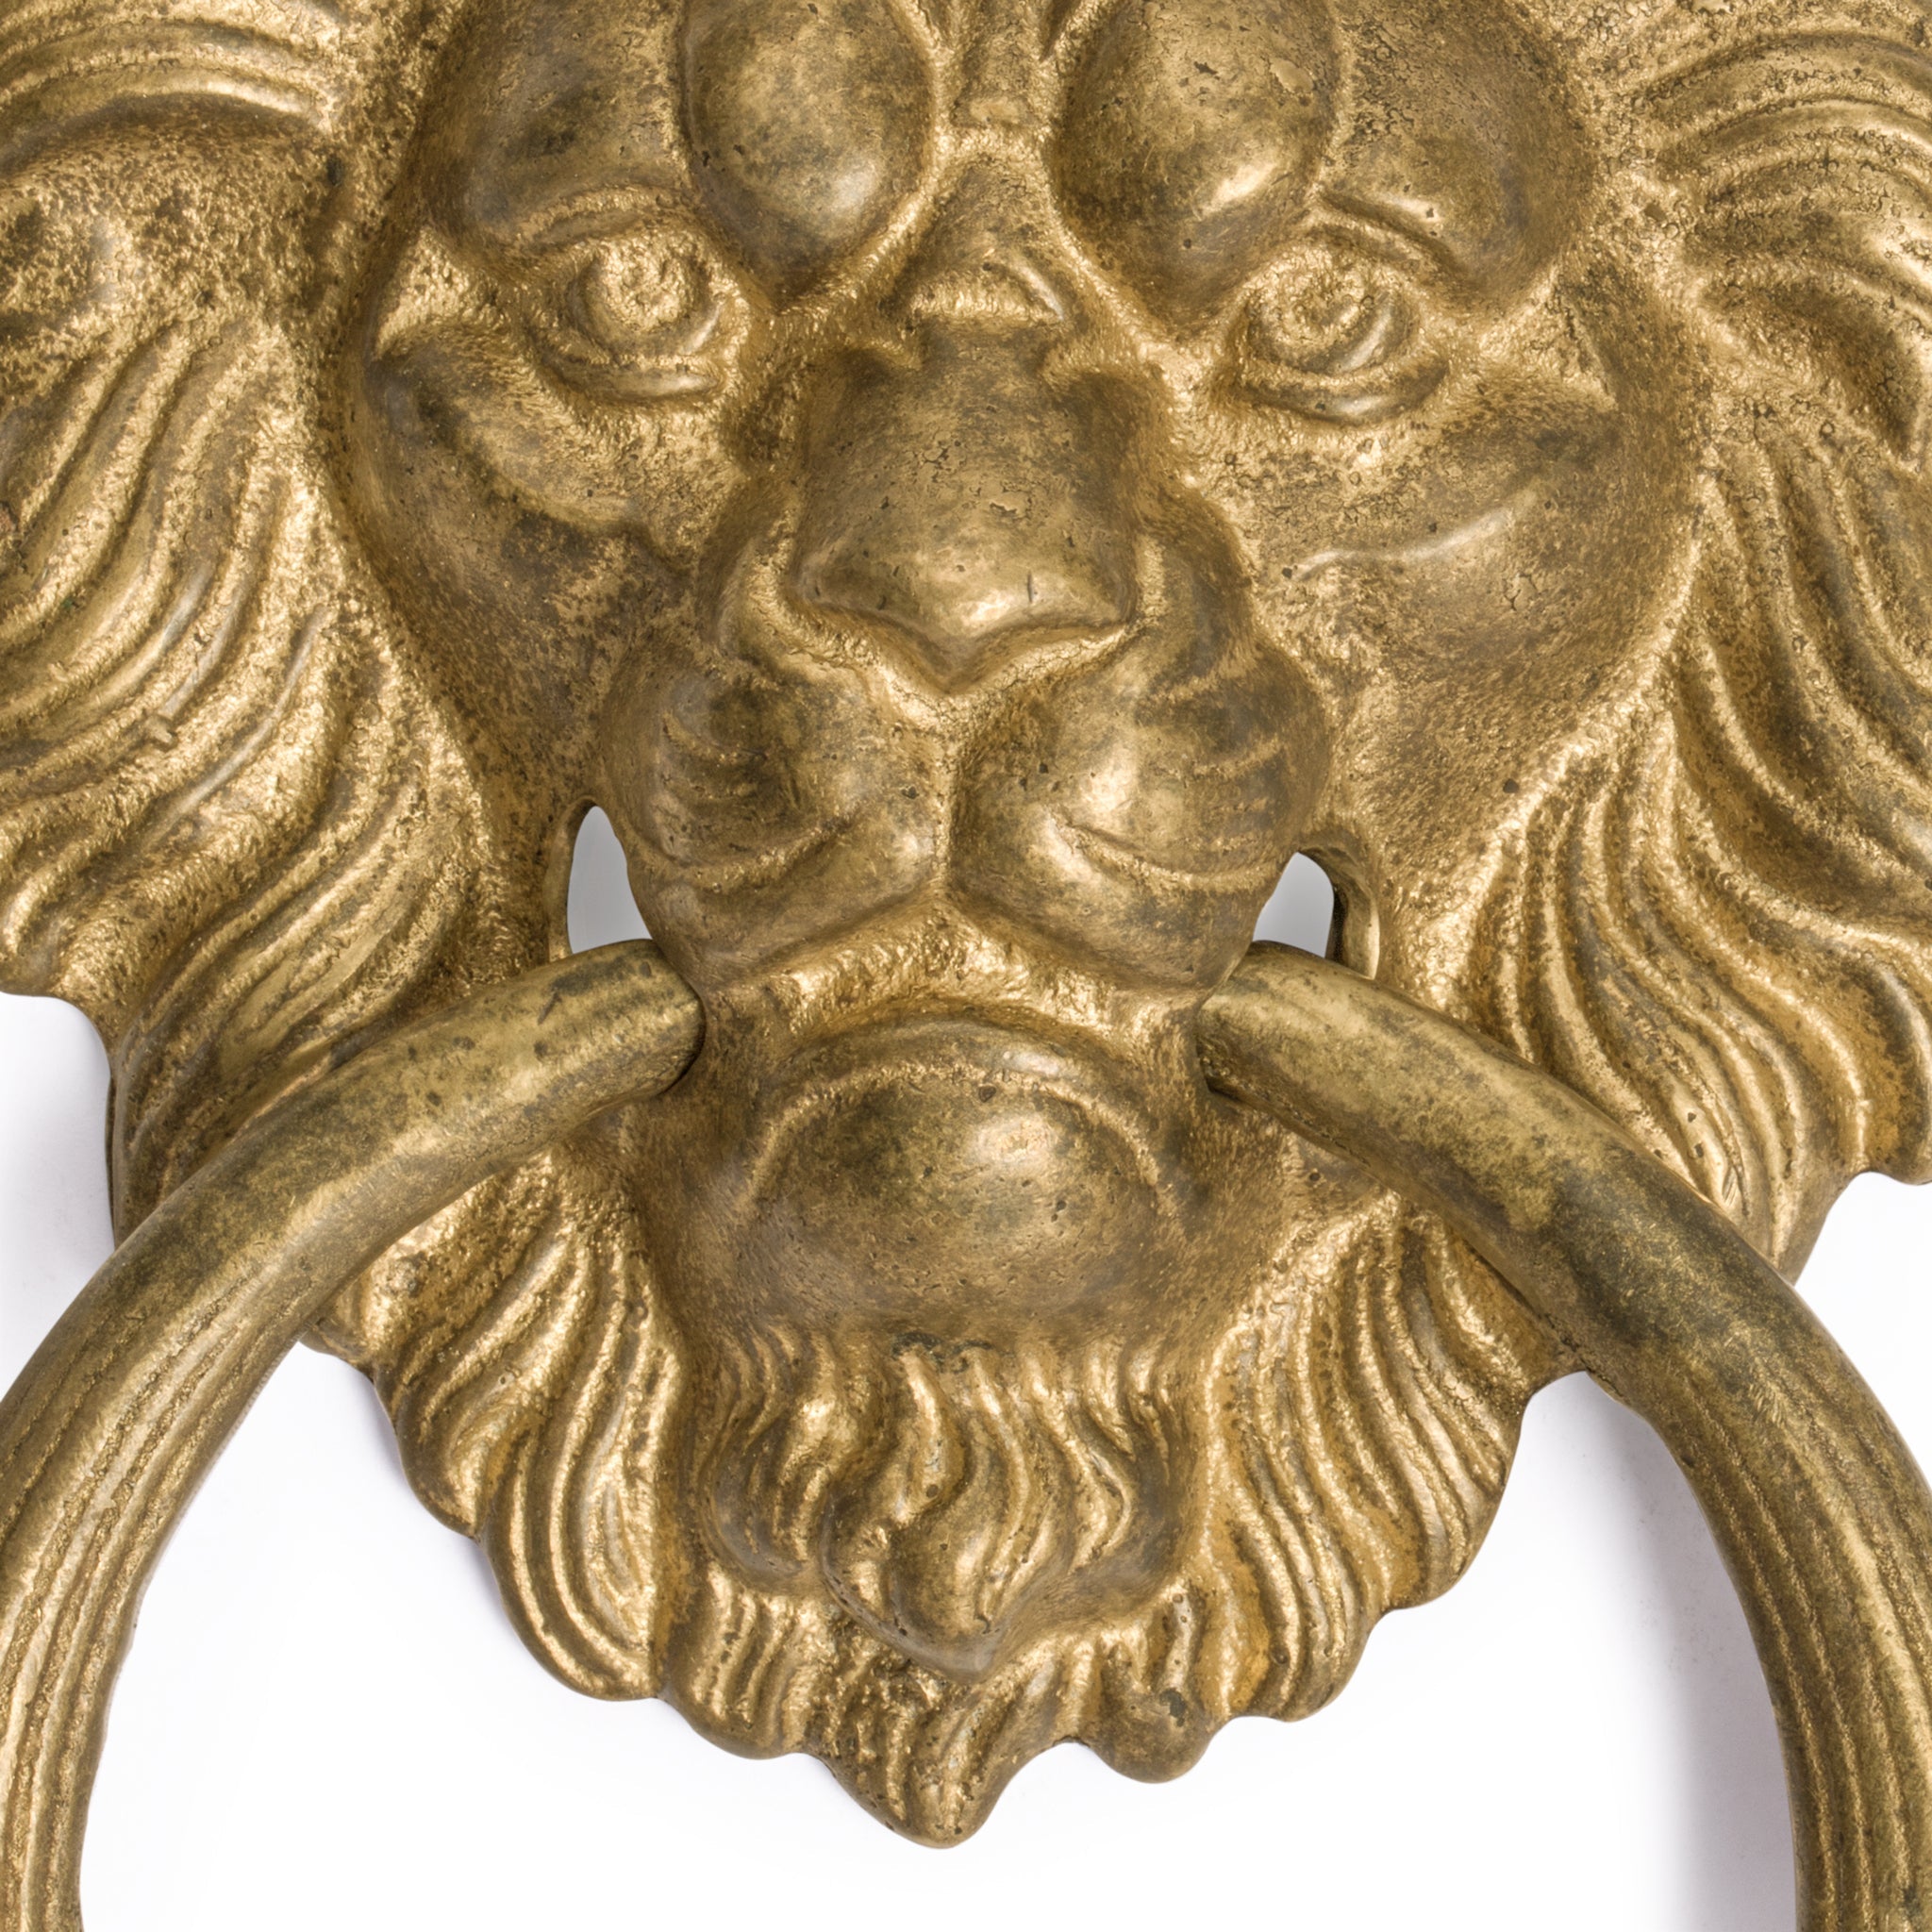 Frowning Lion Pull 7.1"-Chinese Brass Hardware